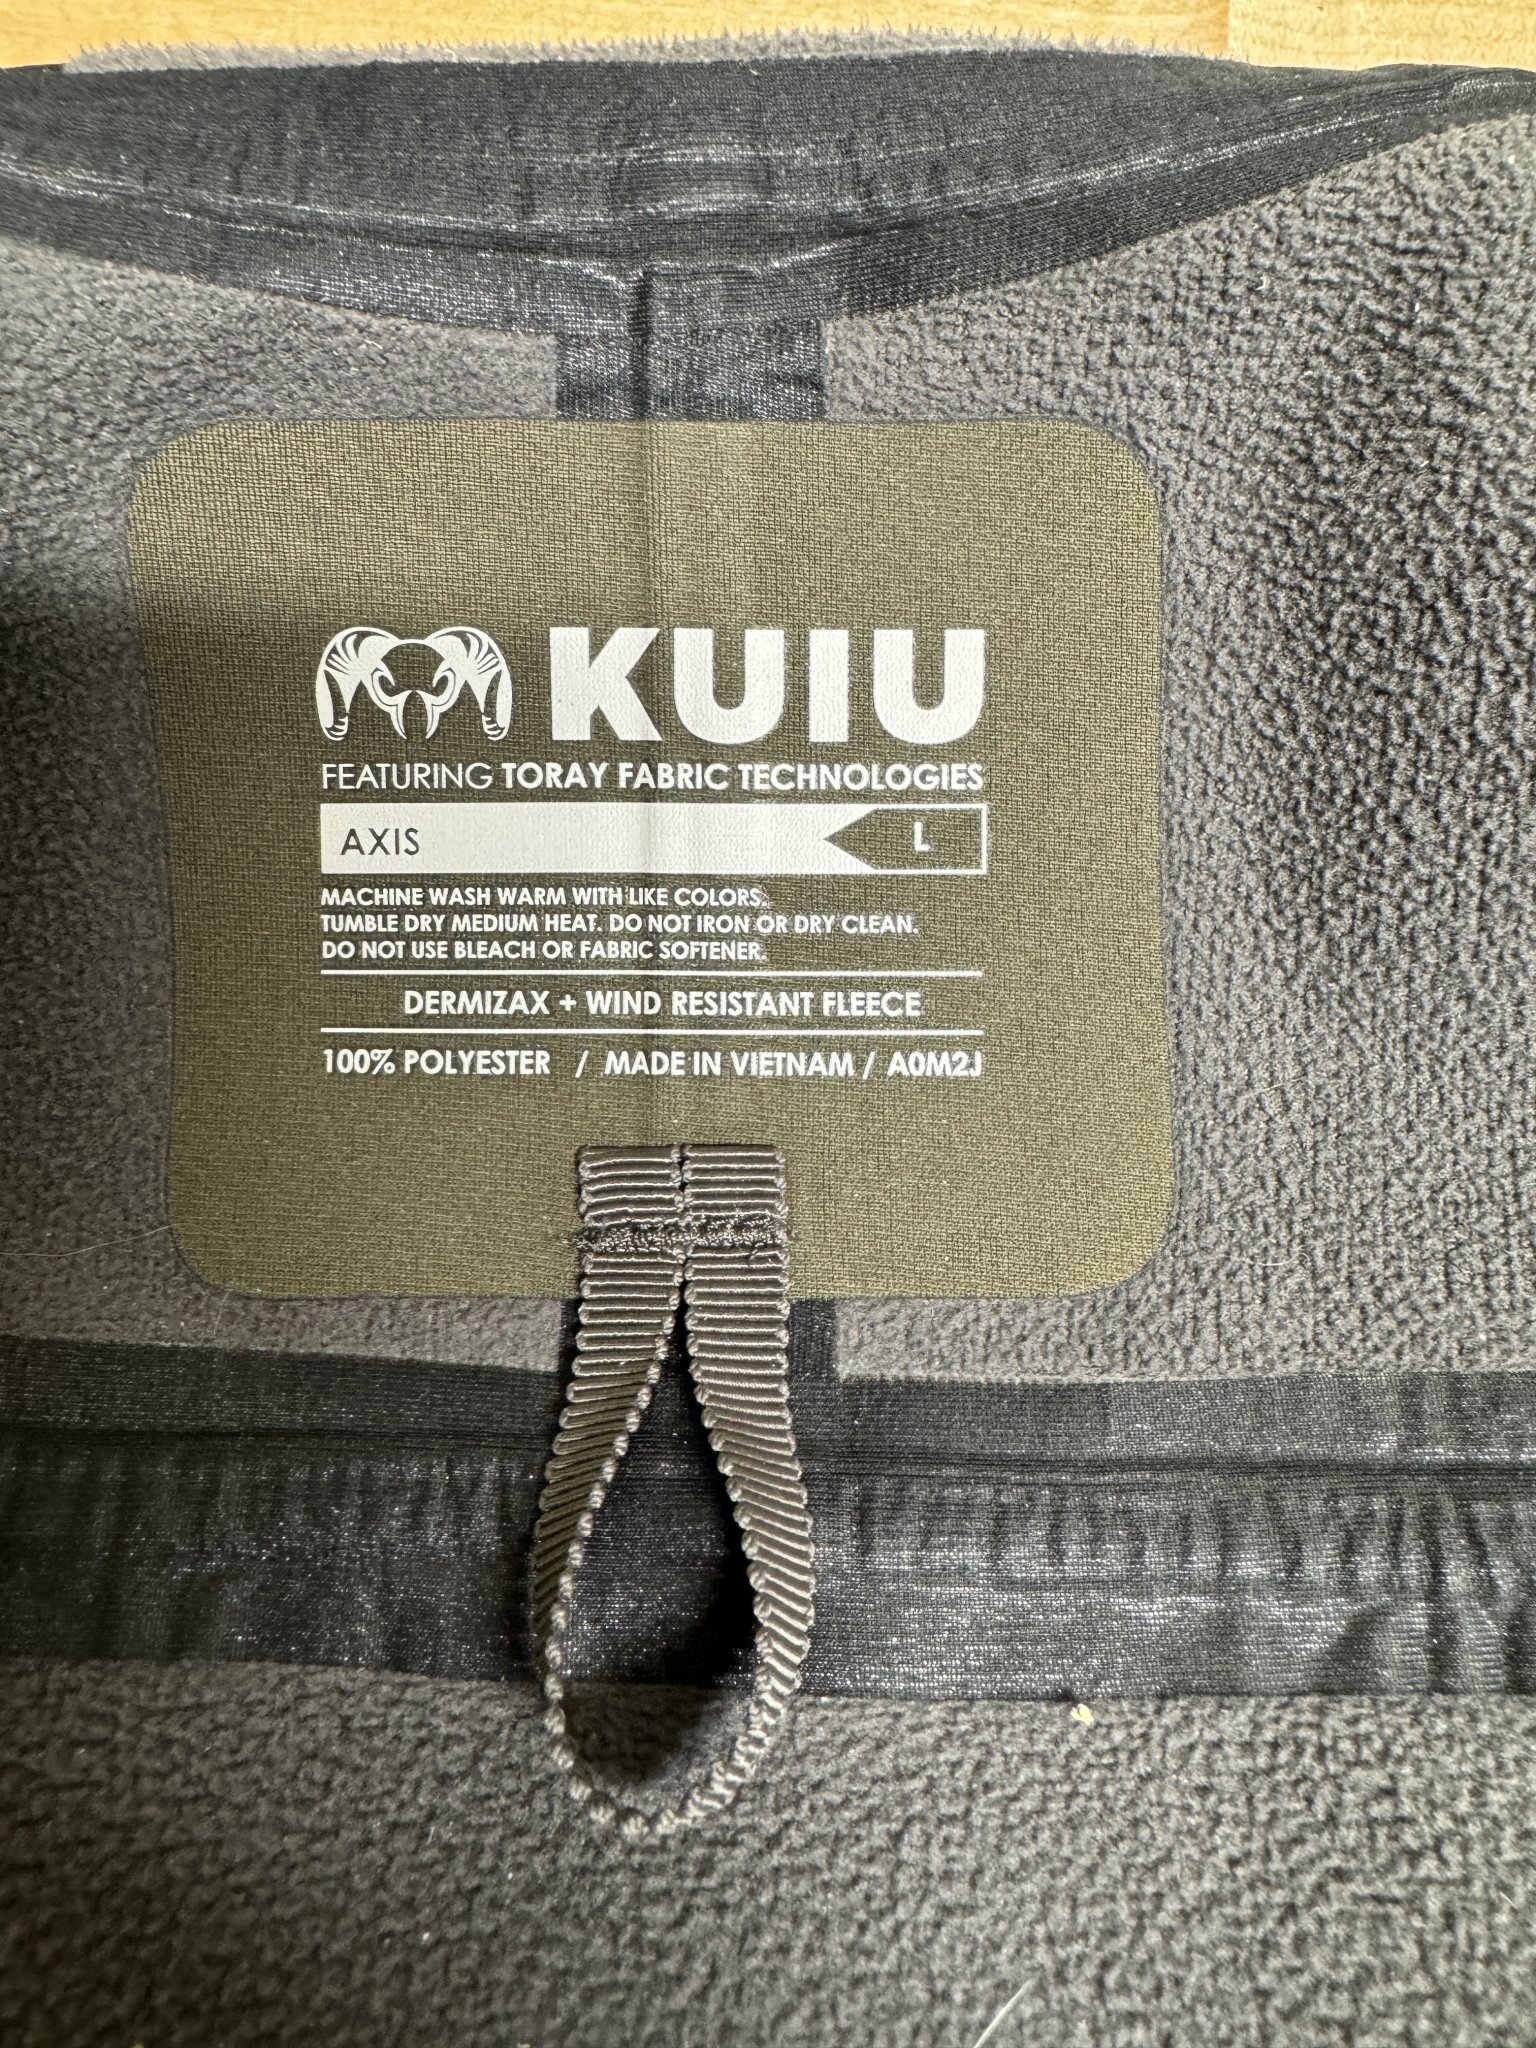 SOLD - kuiu axis jacket large green | Sniper's Hide Forum